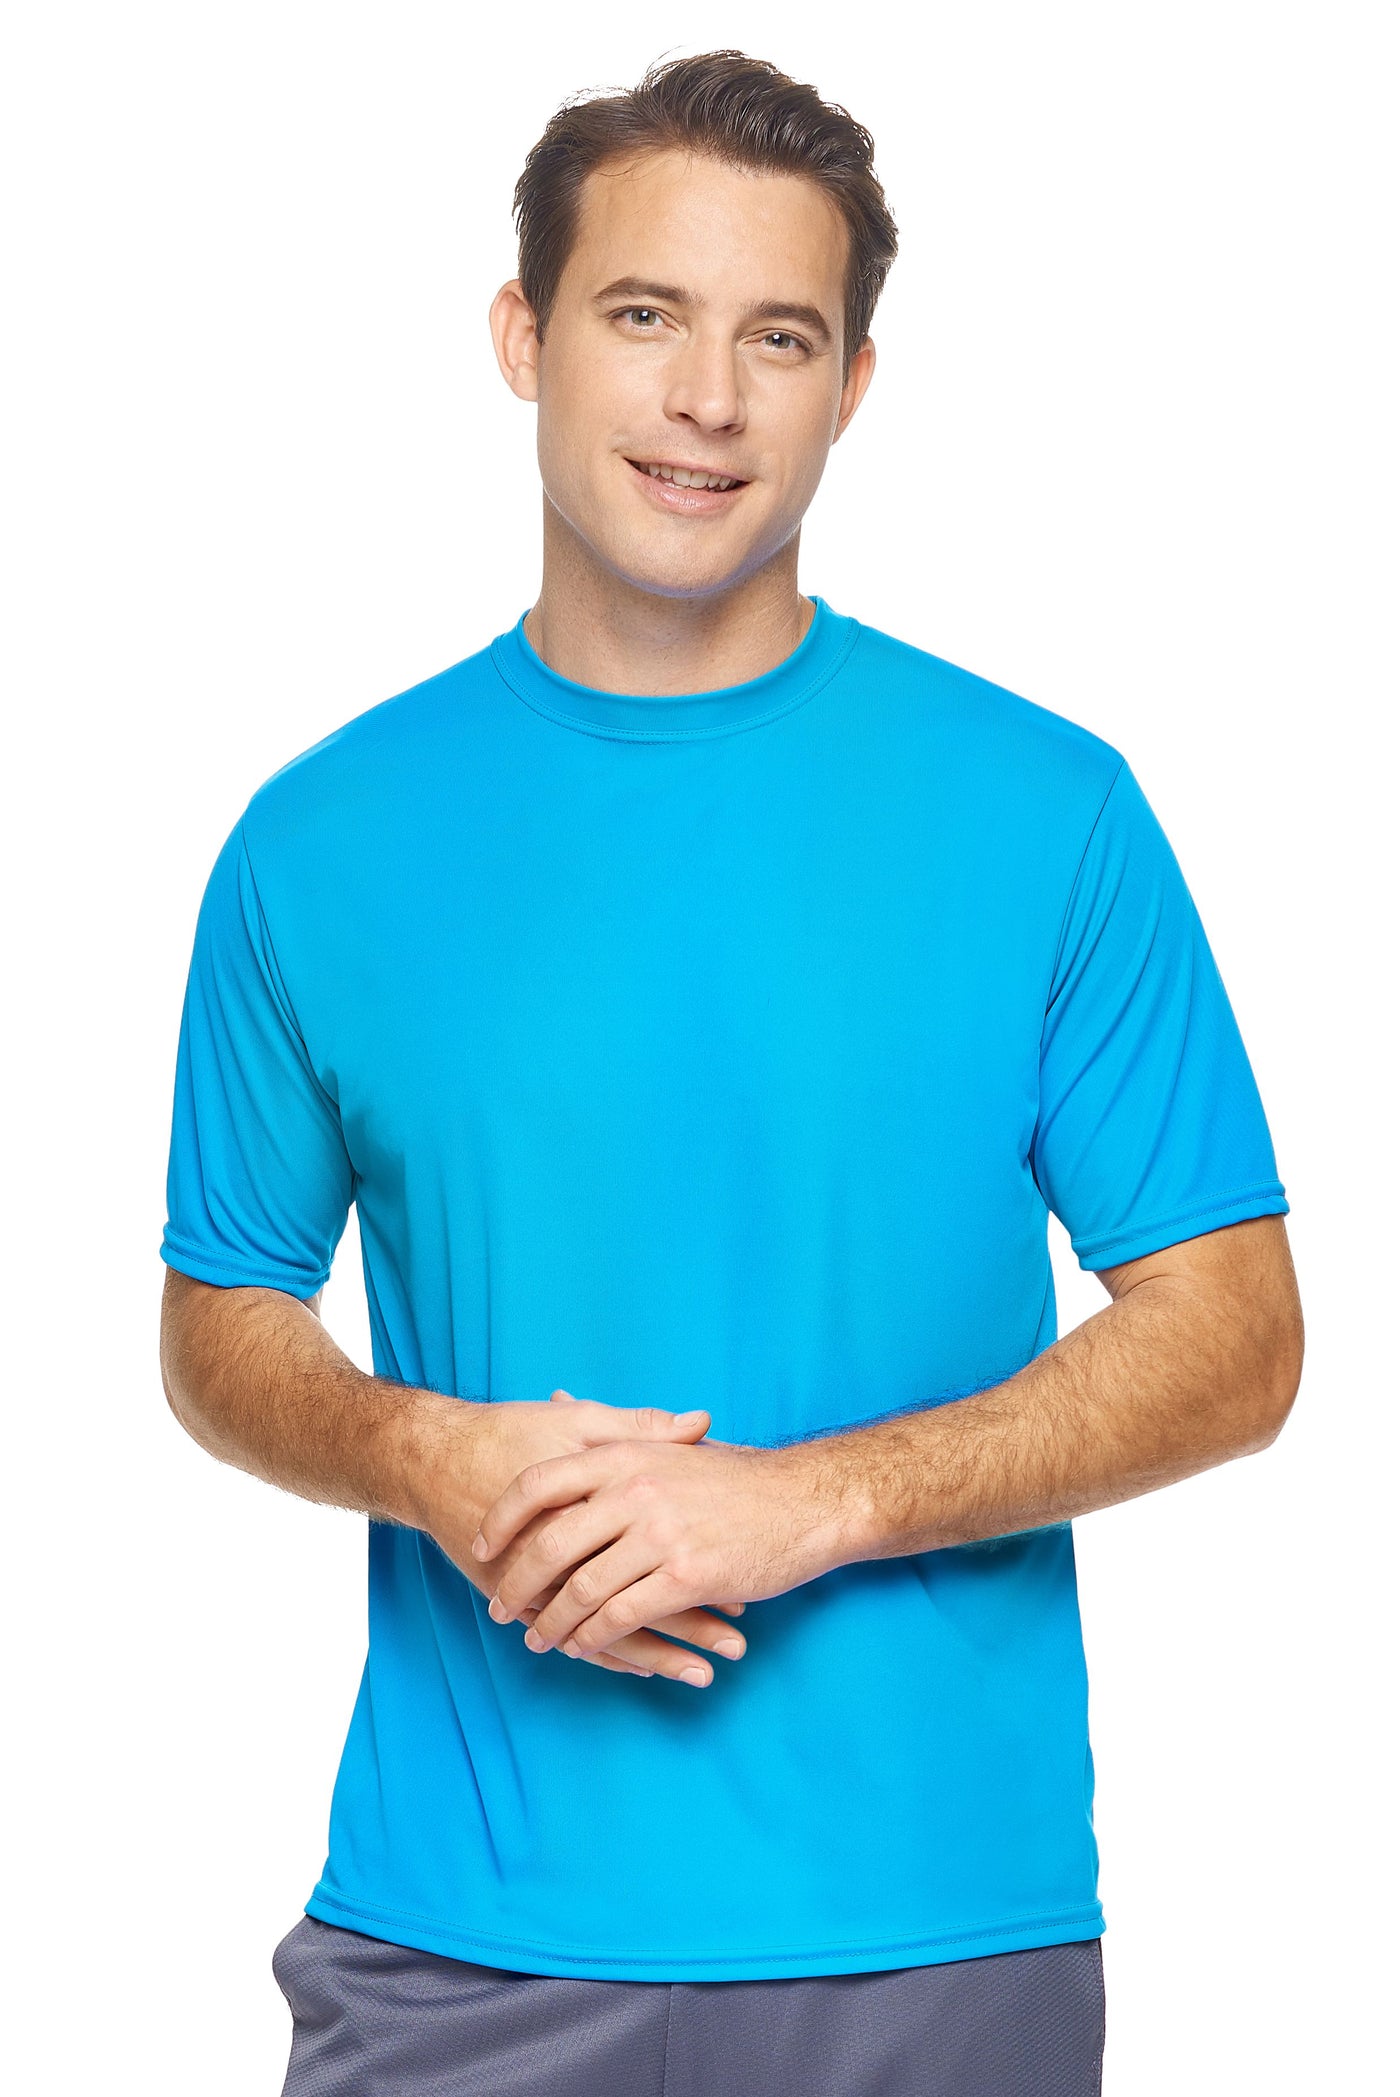 Expert Brand Apparel Men's DriMax Tech Tee Made in USA Safety Blue image#color_safety-blue